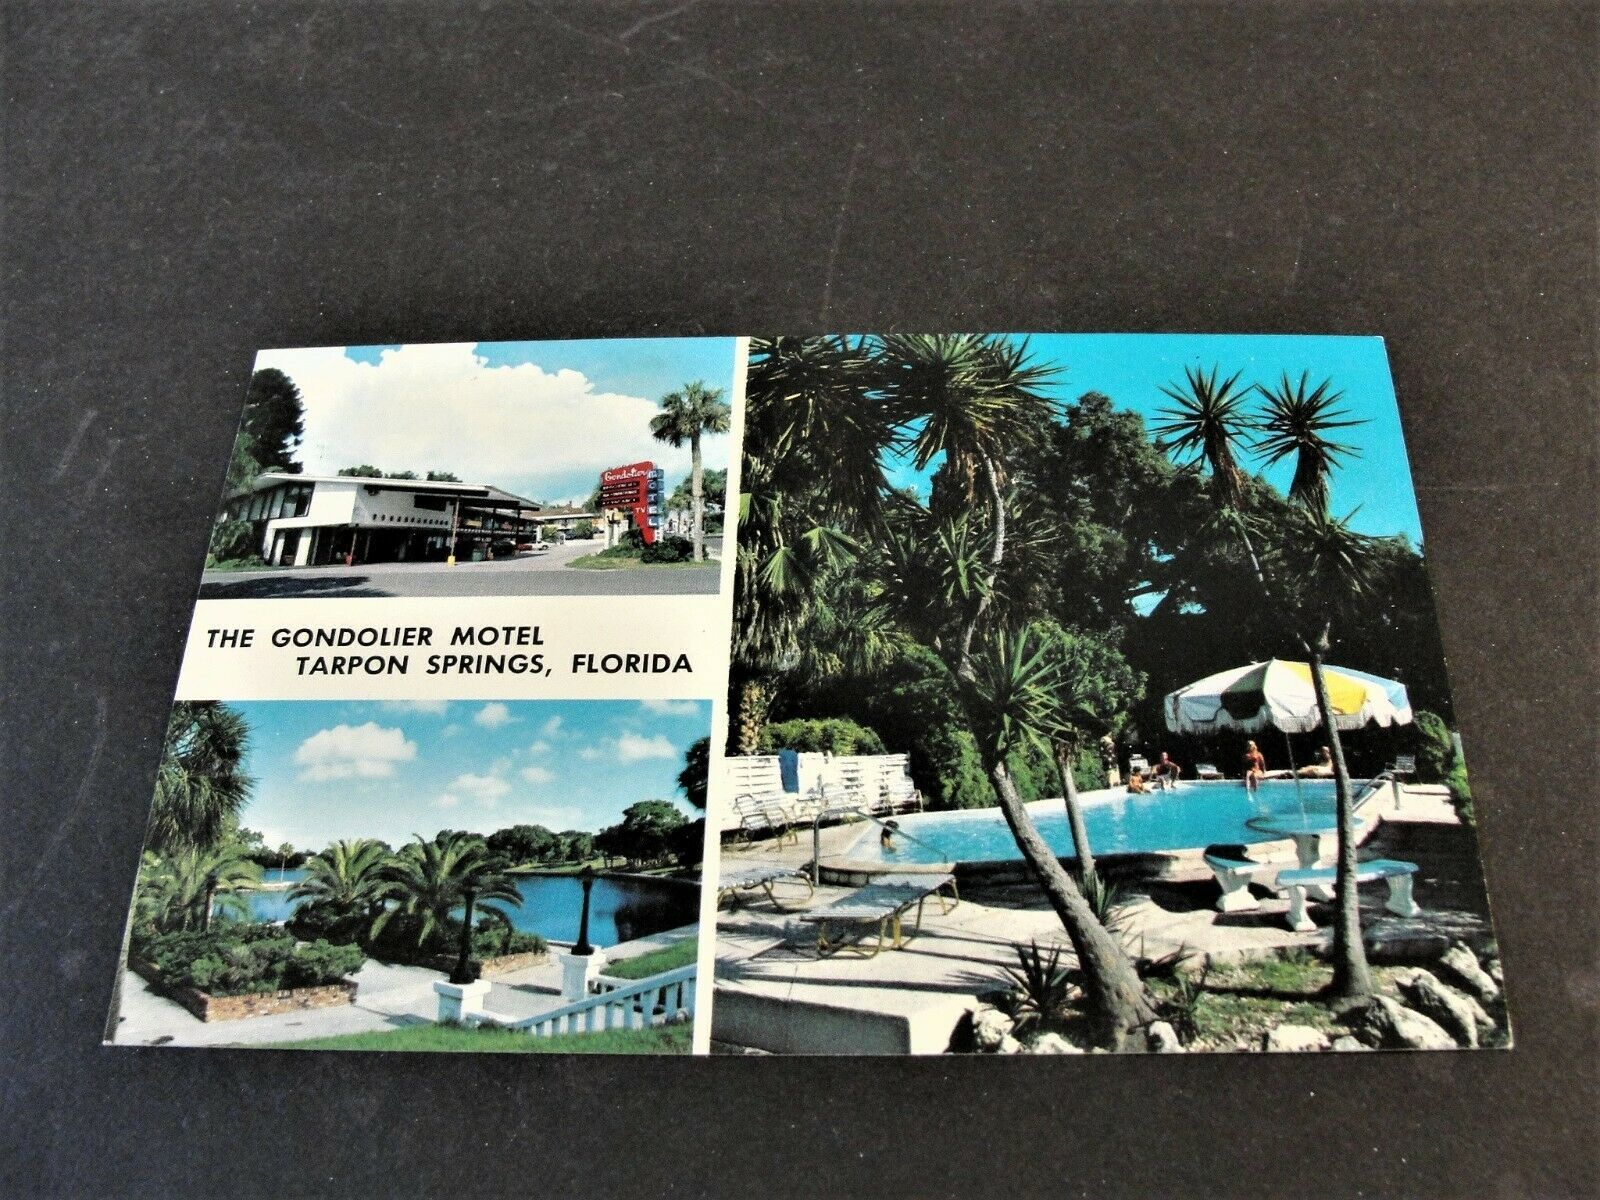 Primary image for The Gondolier Motel, Tarpon Springs, Florida - Unposted Postcard.